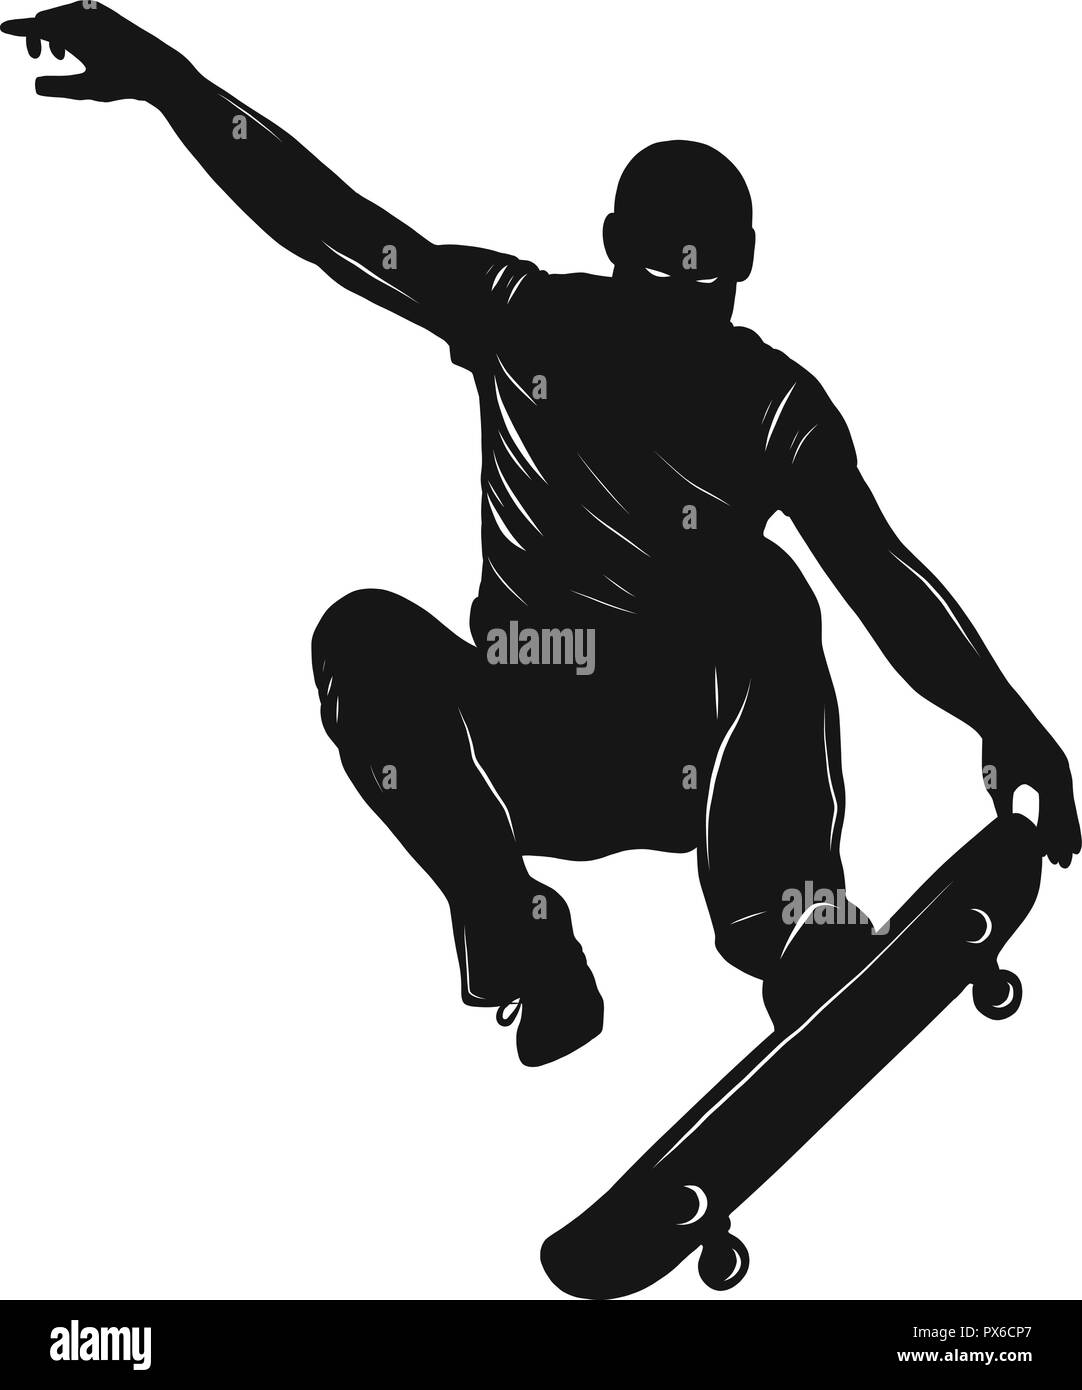 Skateboarder doing a jumping trick, low poly vector illustration. with stain. Stock Vector